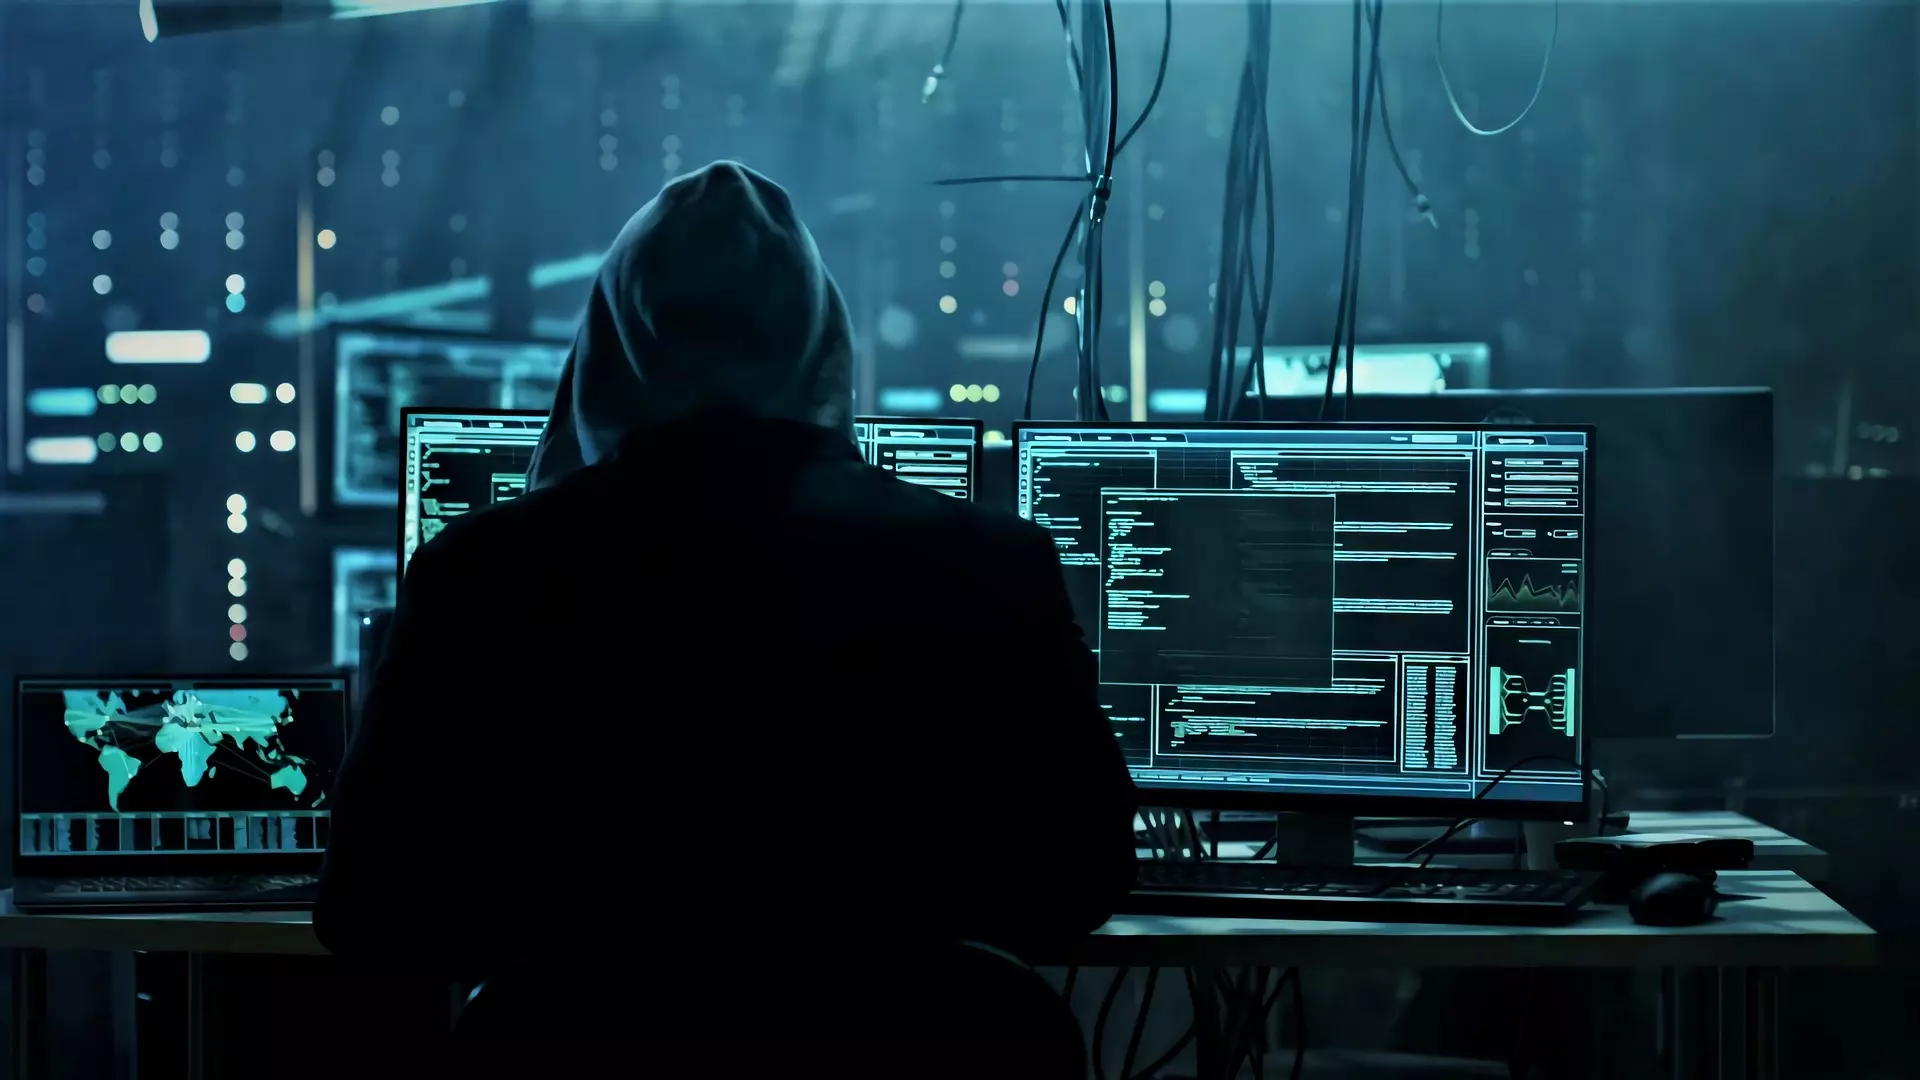 A hooded person sits at a bank of glowing computer screens